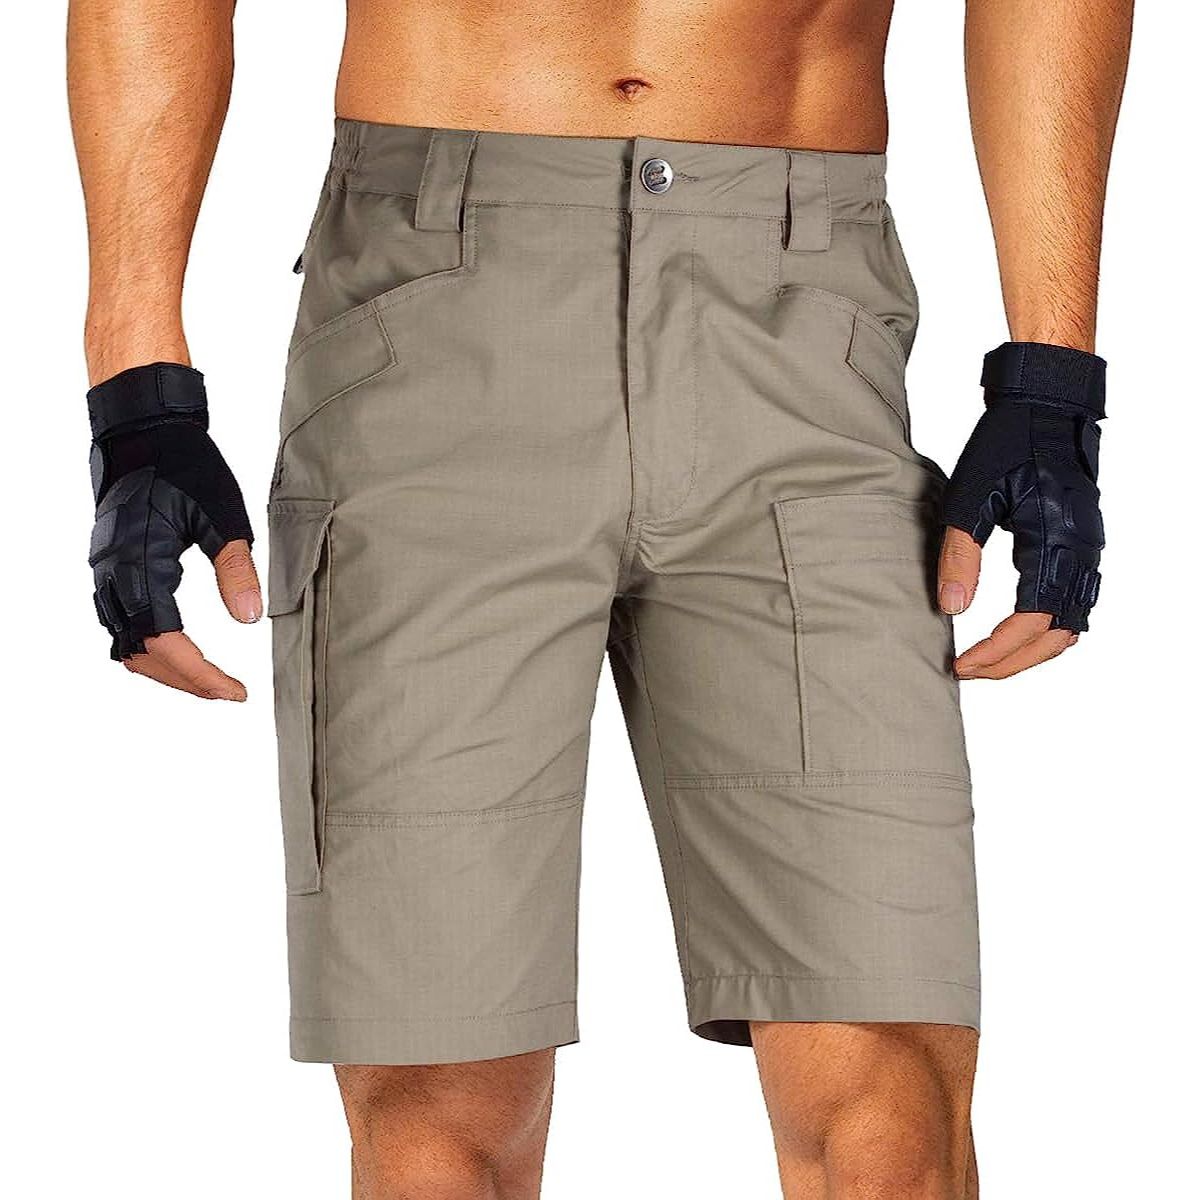 Men's Tactical Cargo Shorts | FreeSoldier